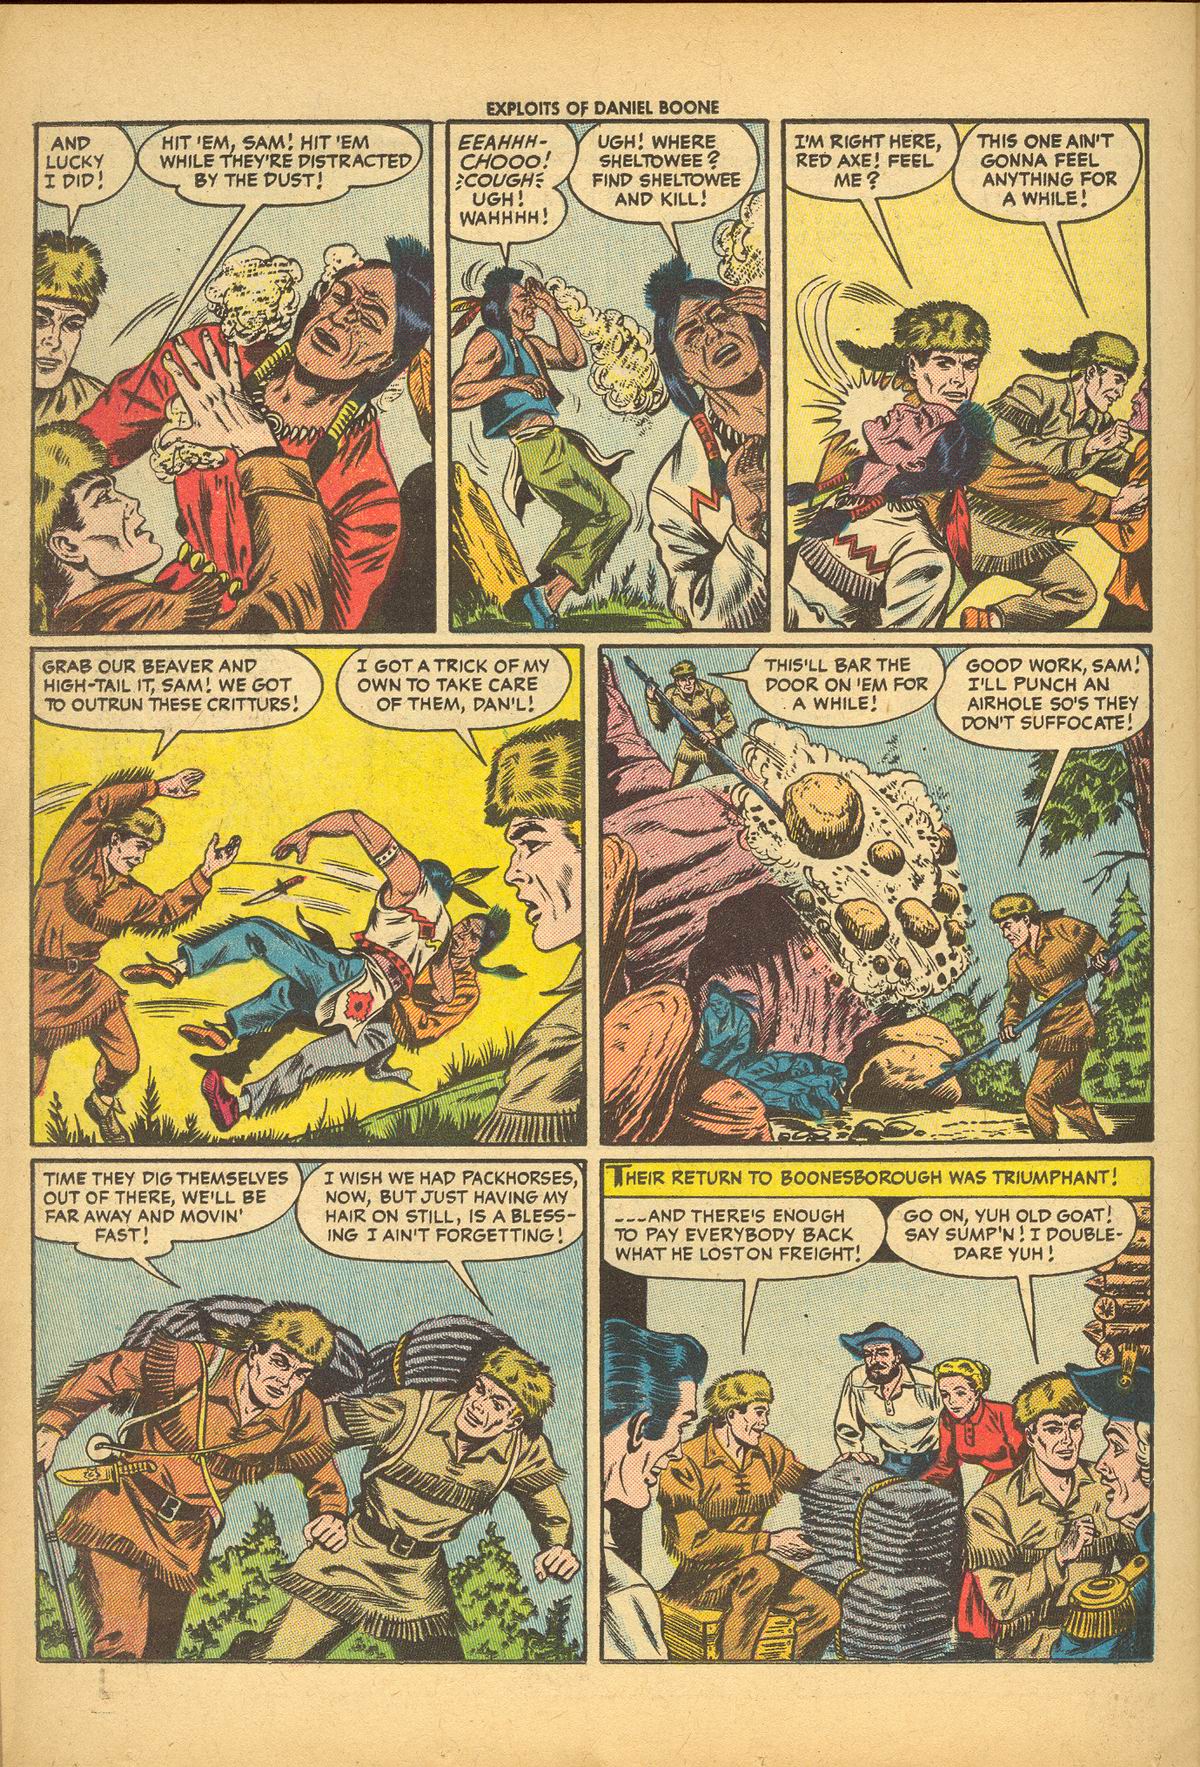 Read online Exploits of Daniel Boone comic -  Issue #3 - 26